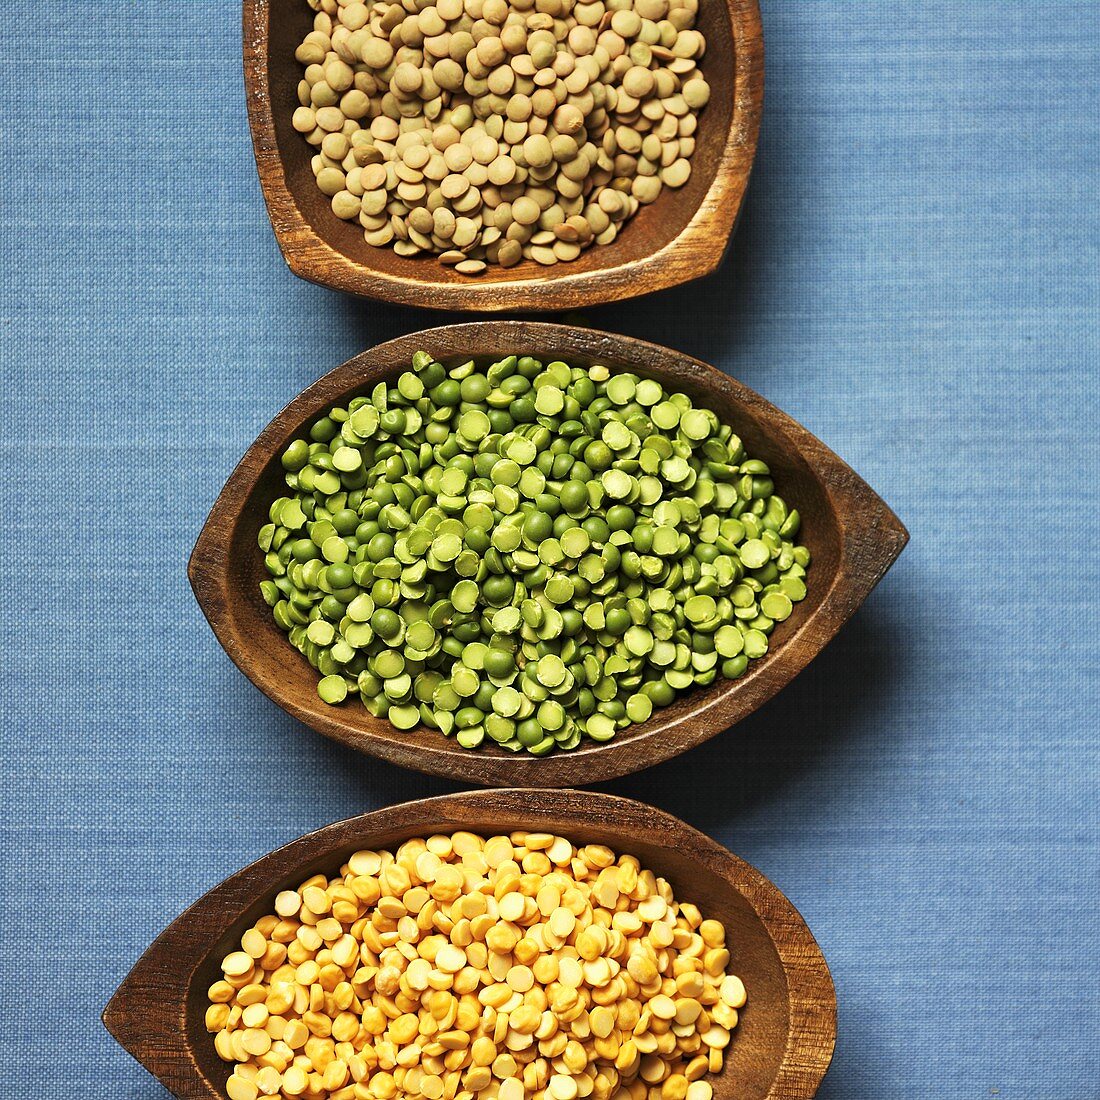 Three types of lentils in bowls